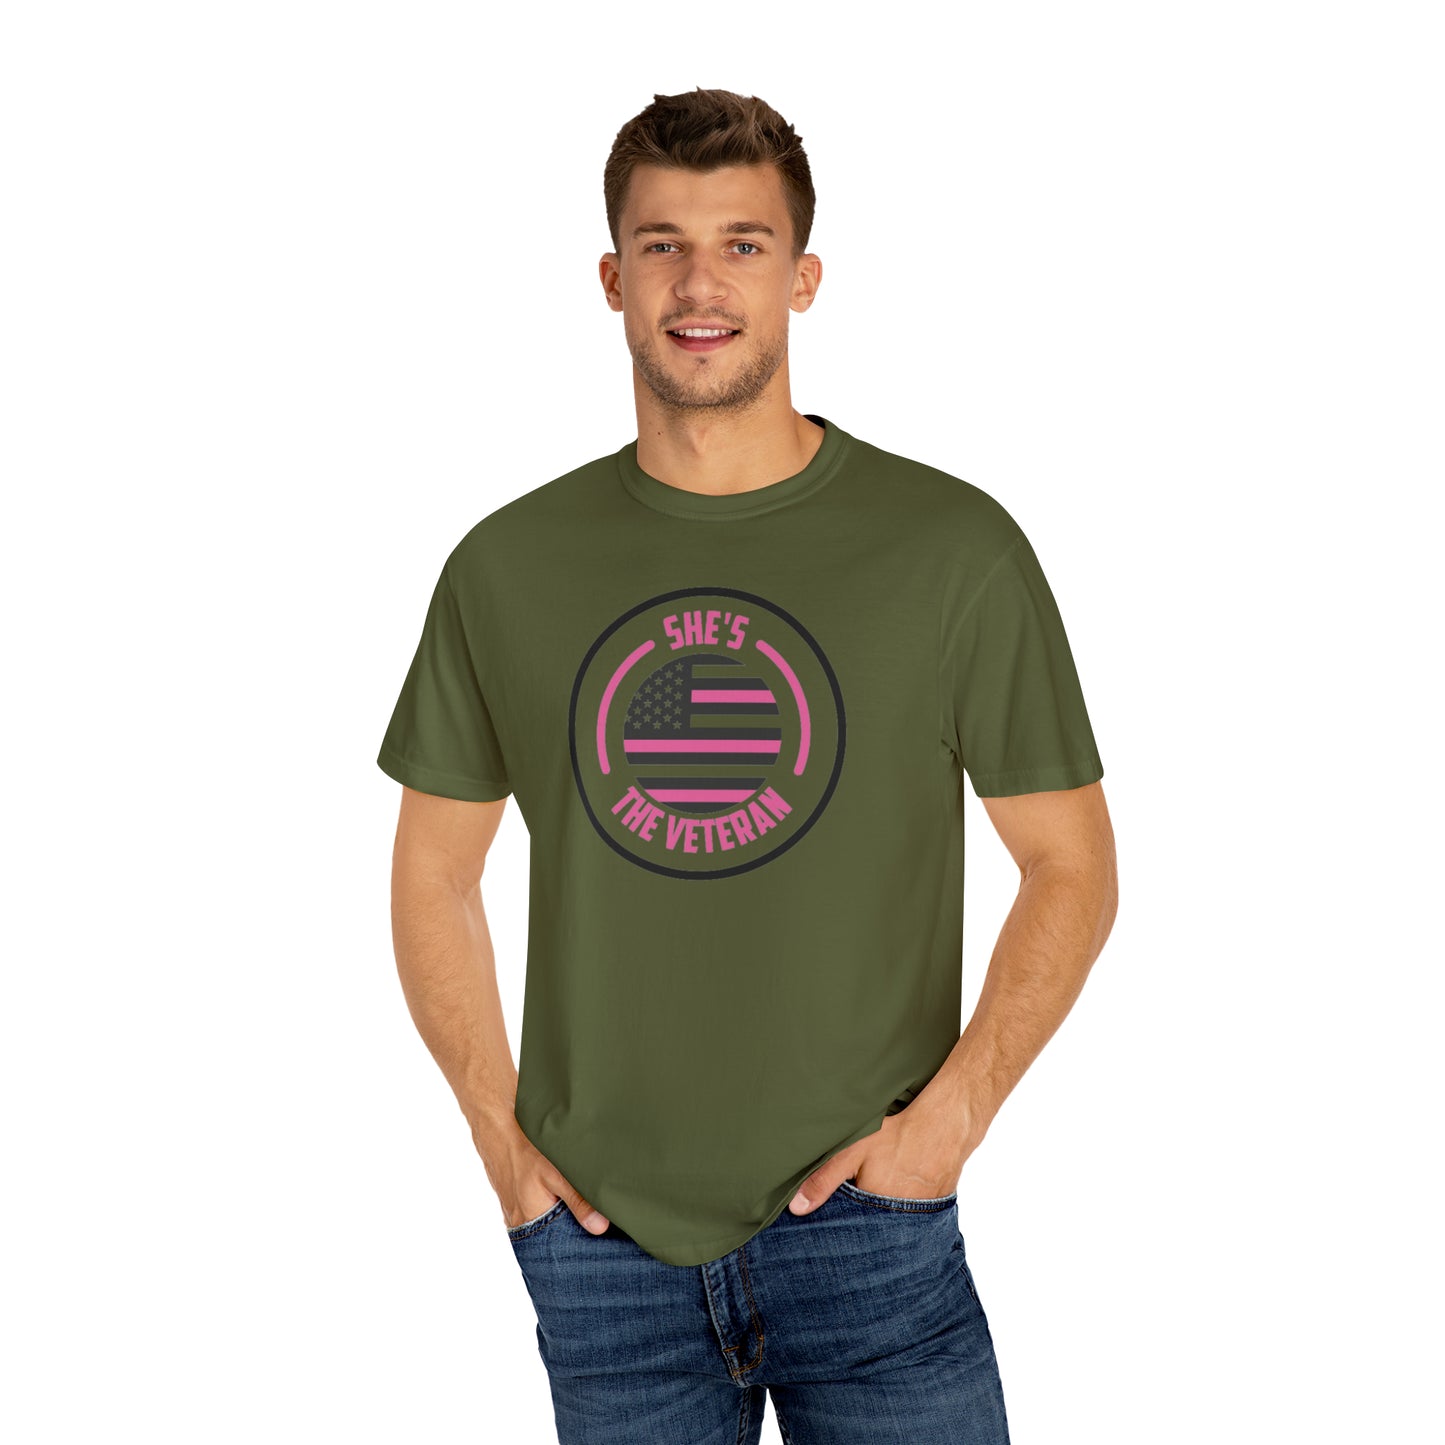 Choose Your Military Branch! T-shirt